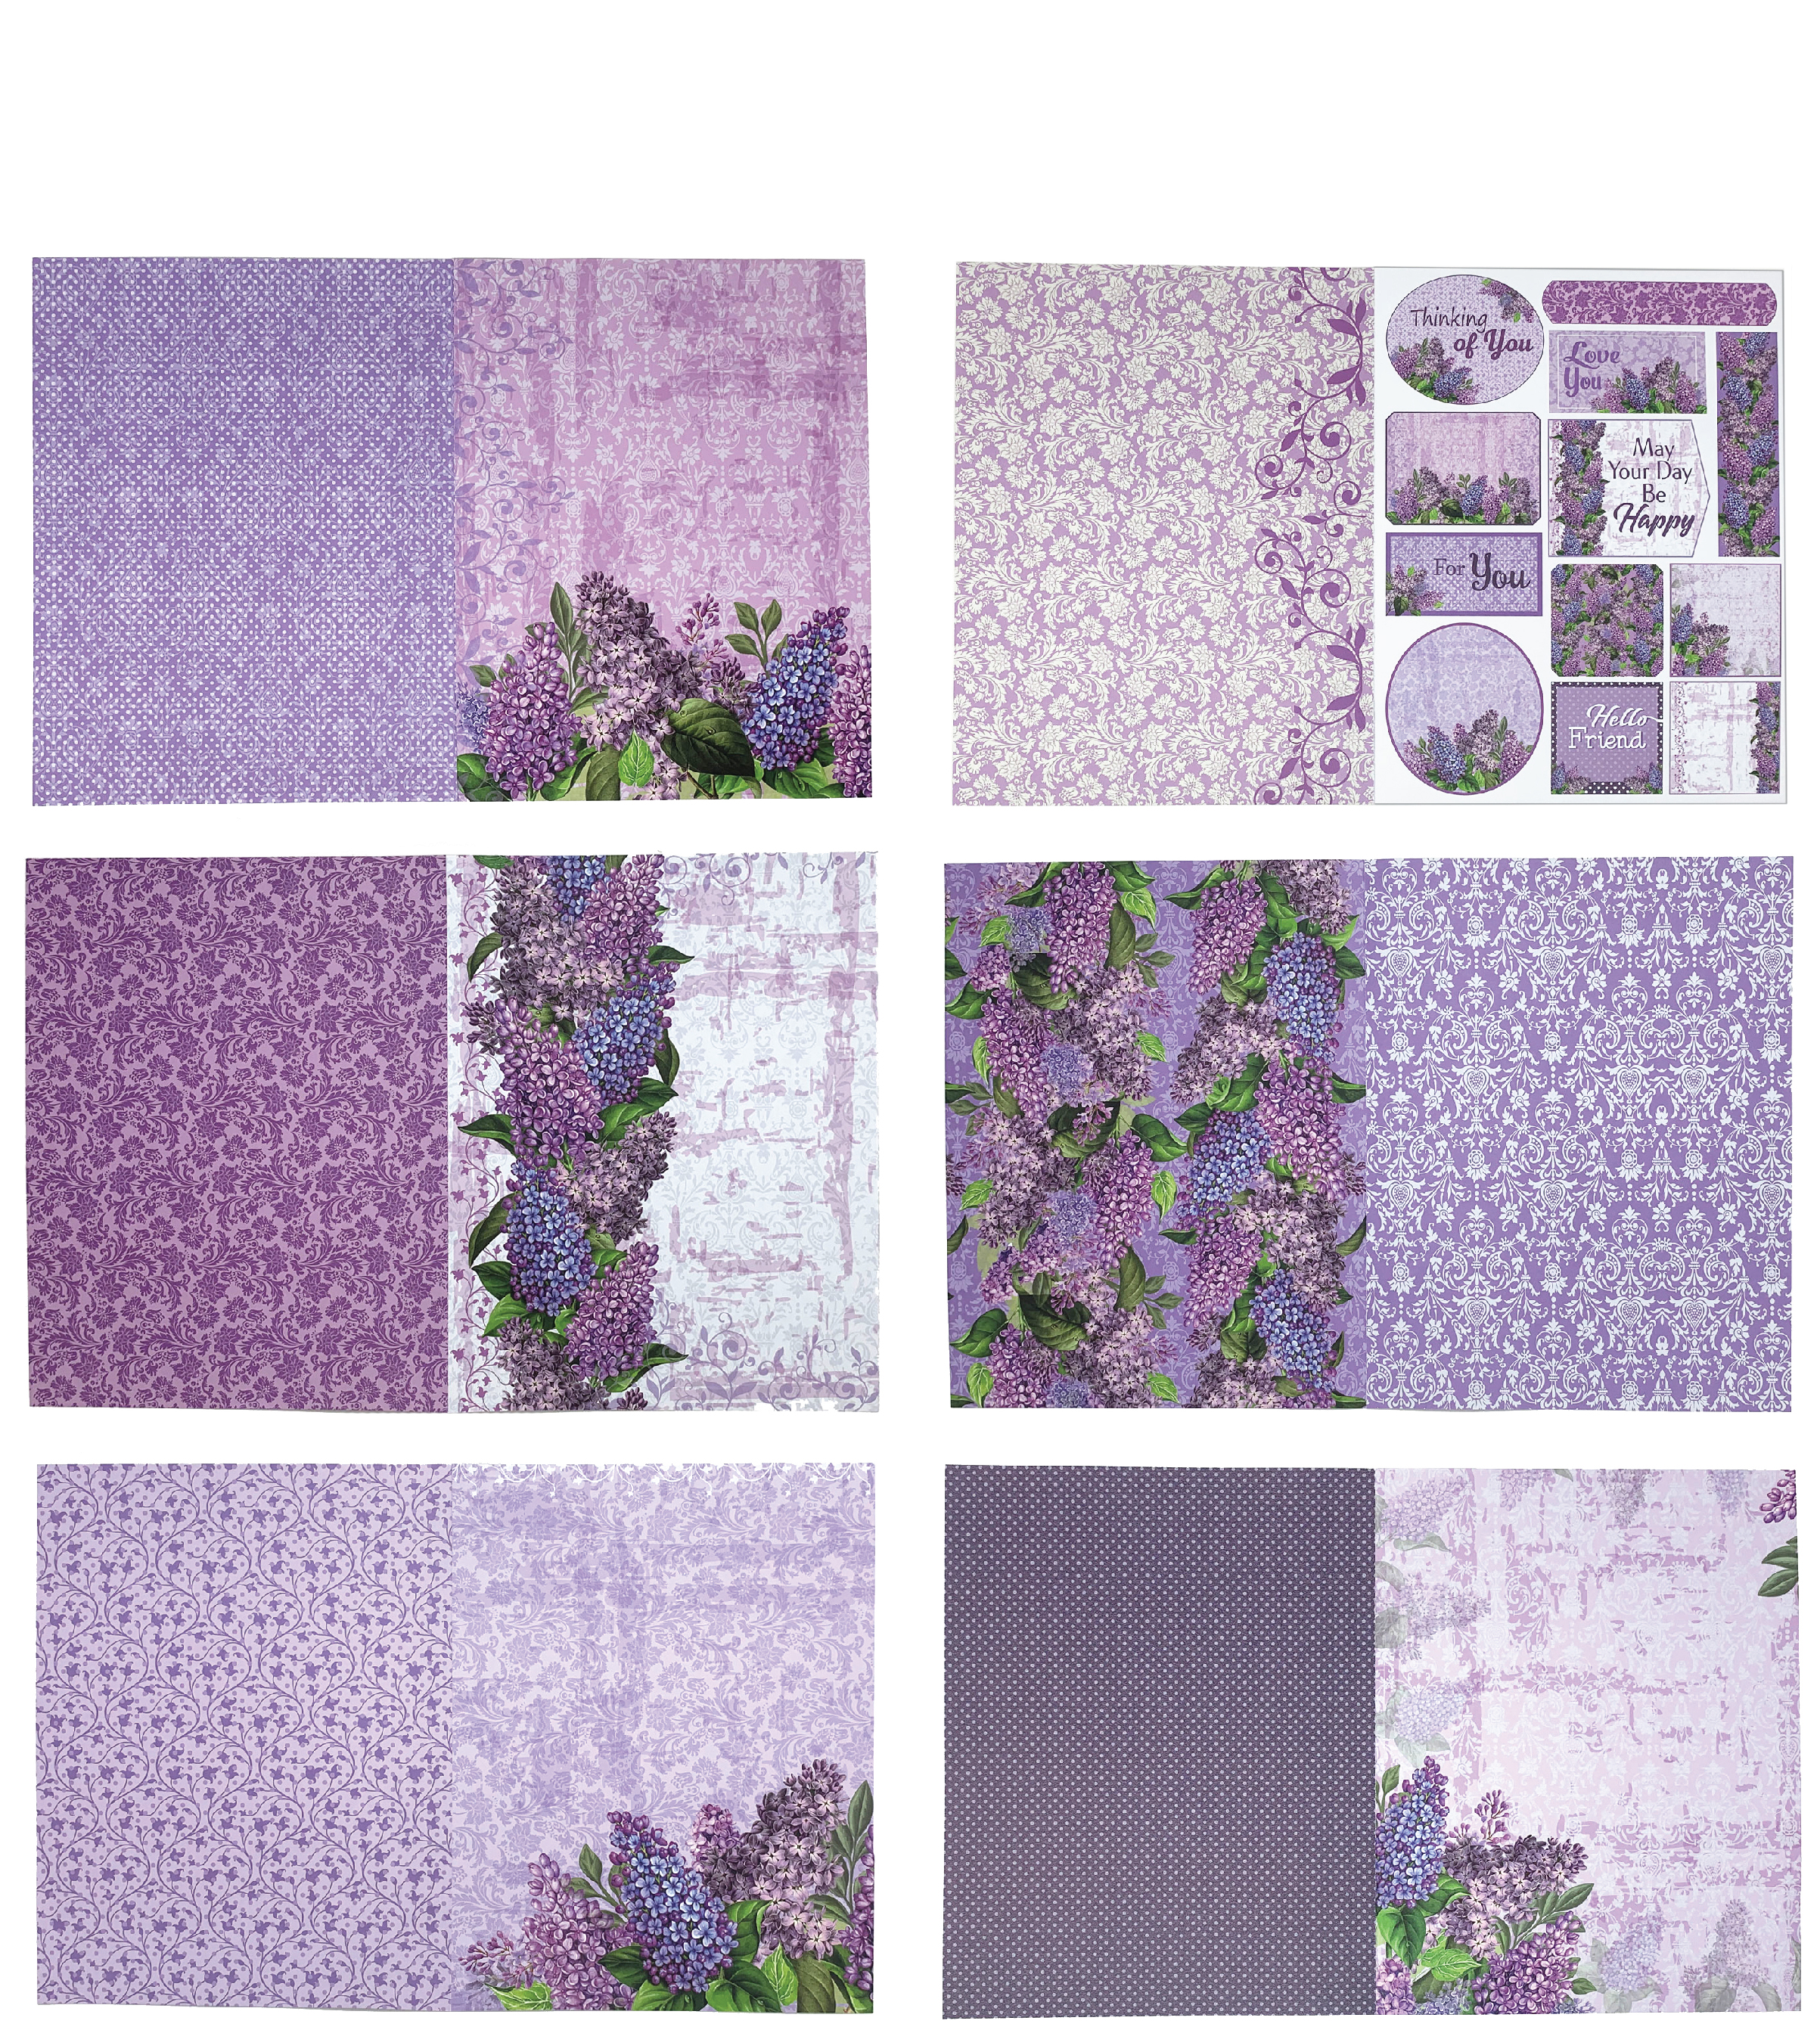 Lilacs in Bloom 8.5x11 Paper Pack